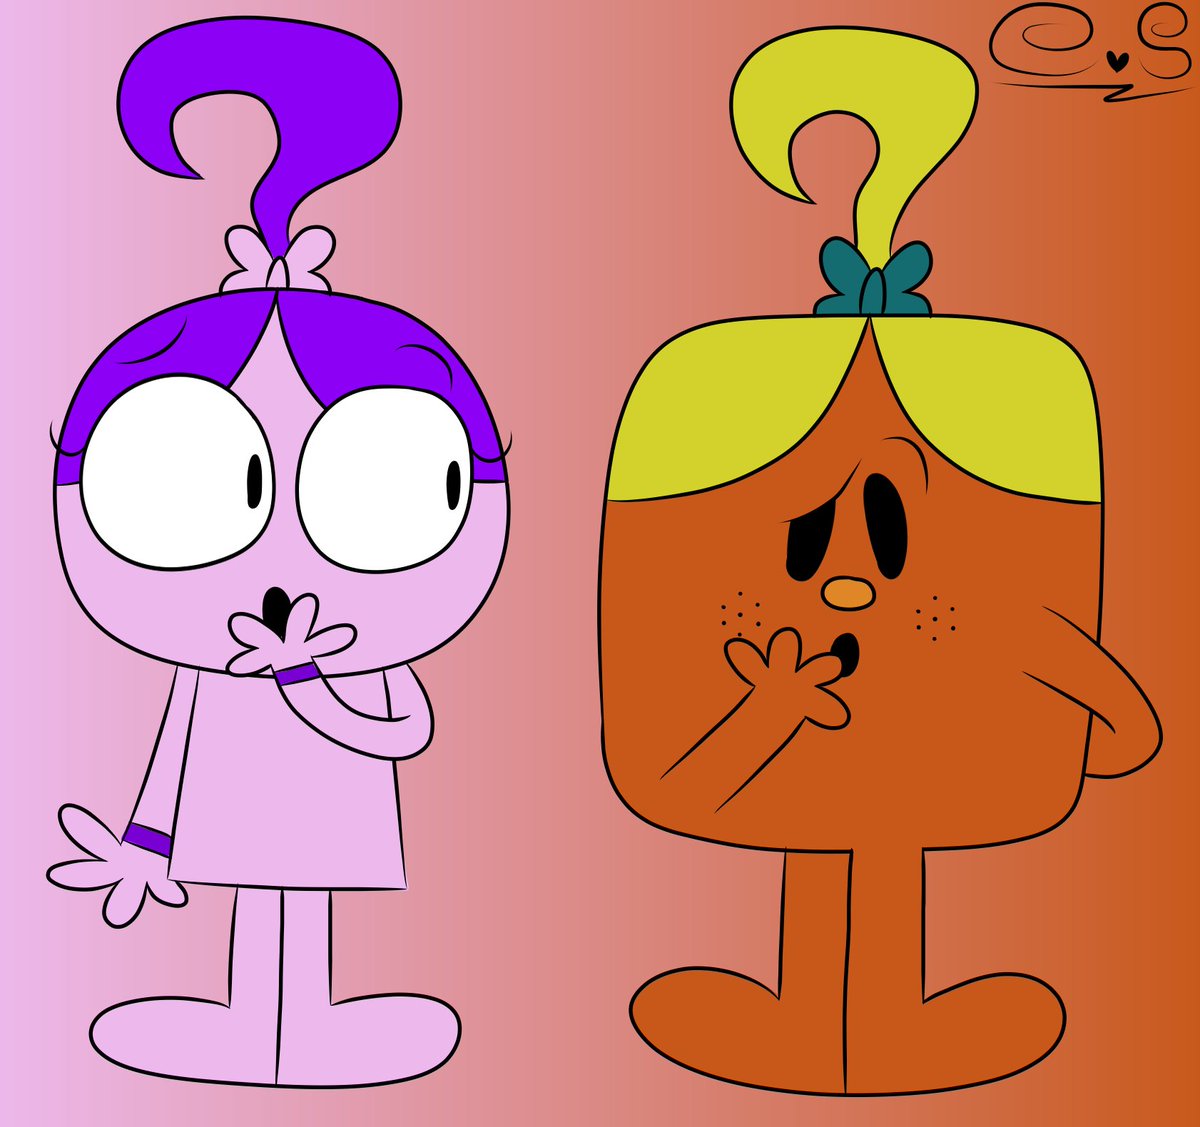 What if Questionable Girl and Miss Curious meet each other?

Gift for @Snowgirlkitty24 
#artists #artistsontwitter #ArtistOnTwitter #artistsonx #ArtistOnX #MrMen #MrMenShow #TheMrMenShow #MrMenAndLittleMiss